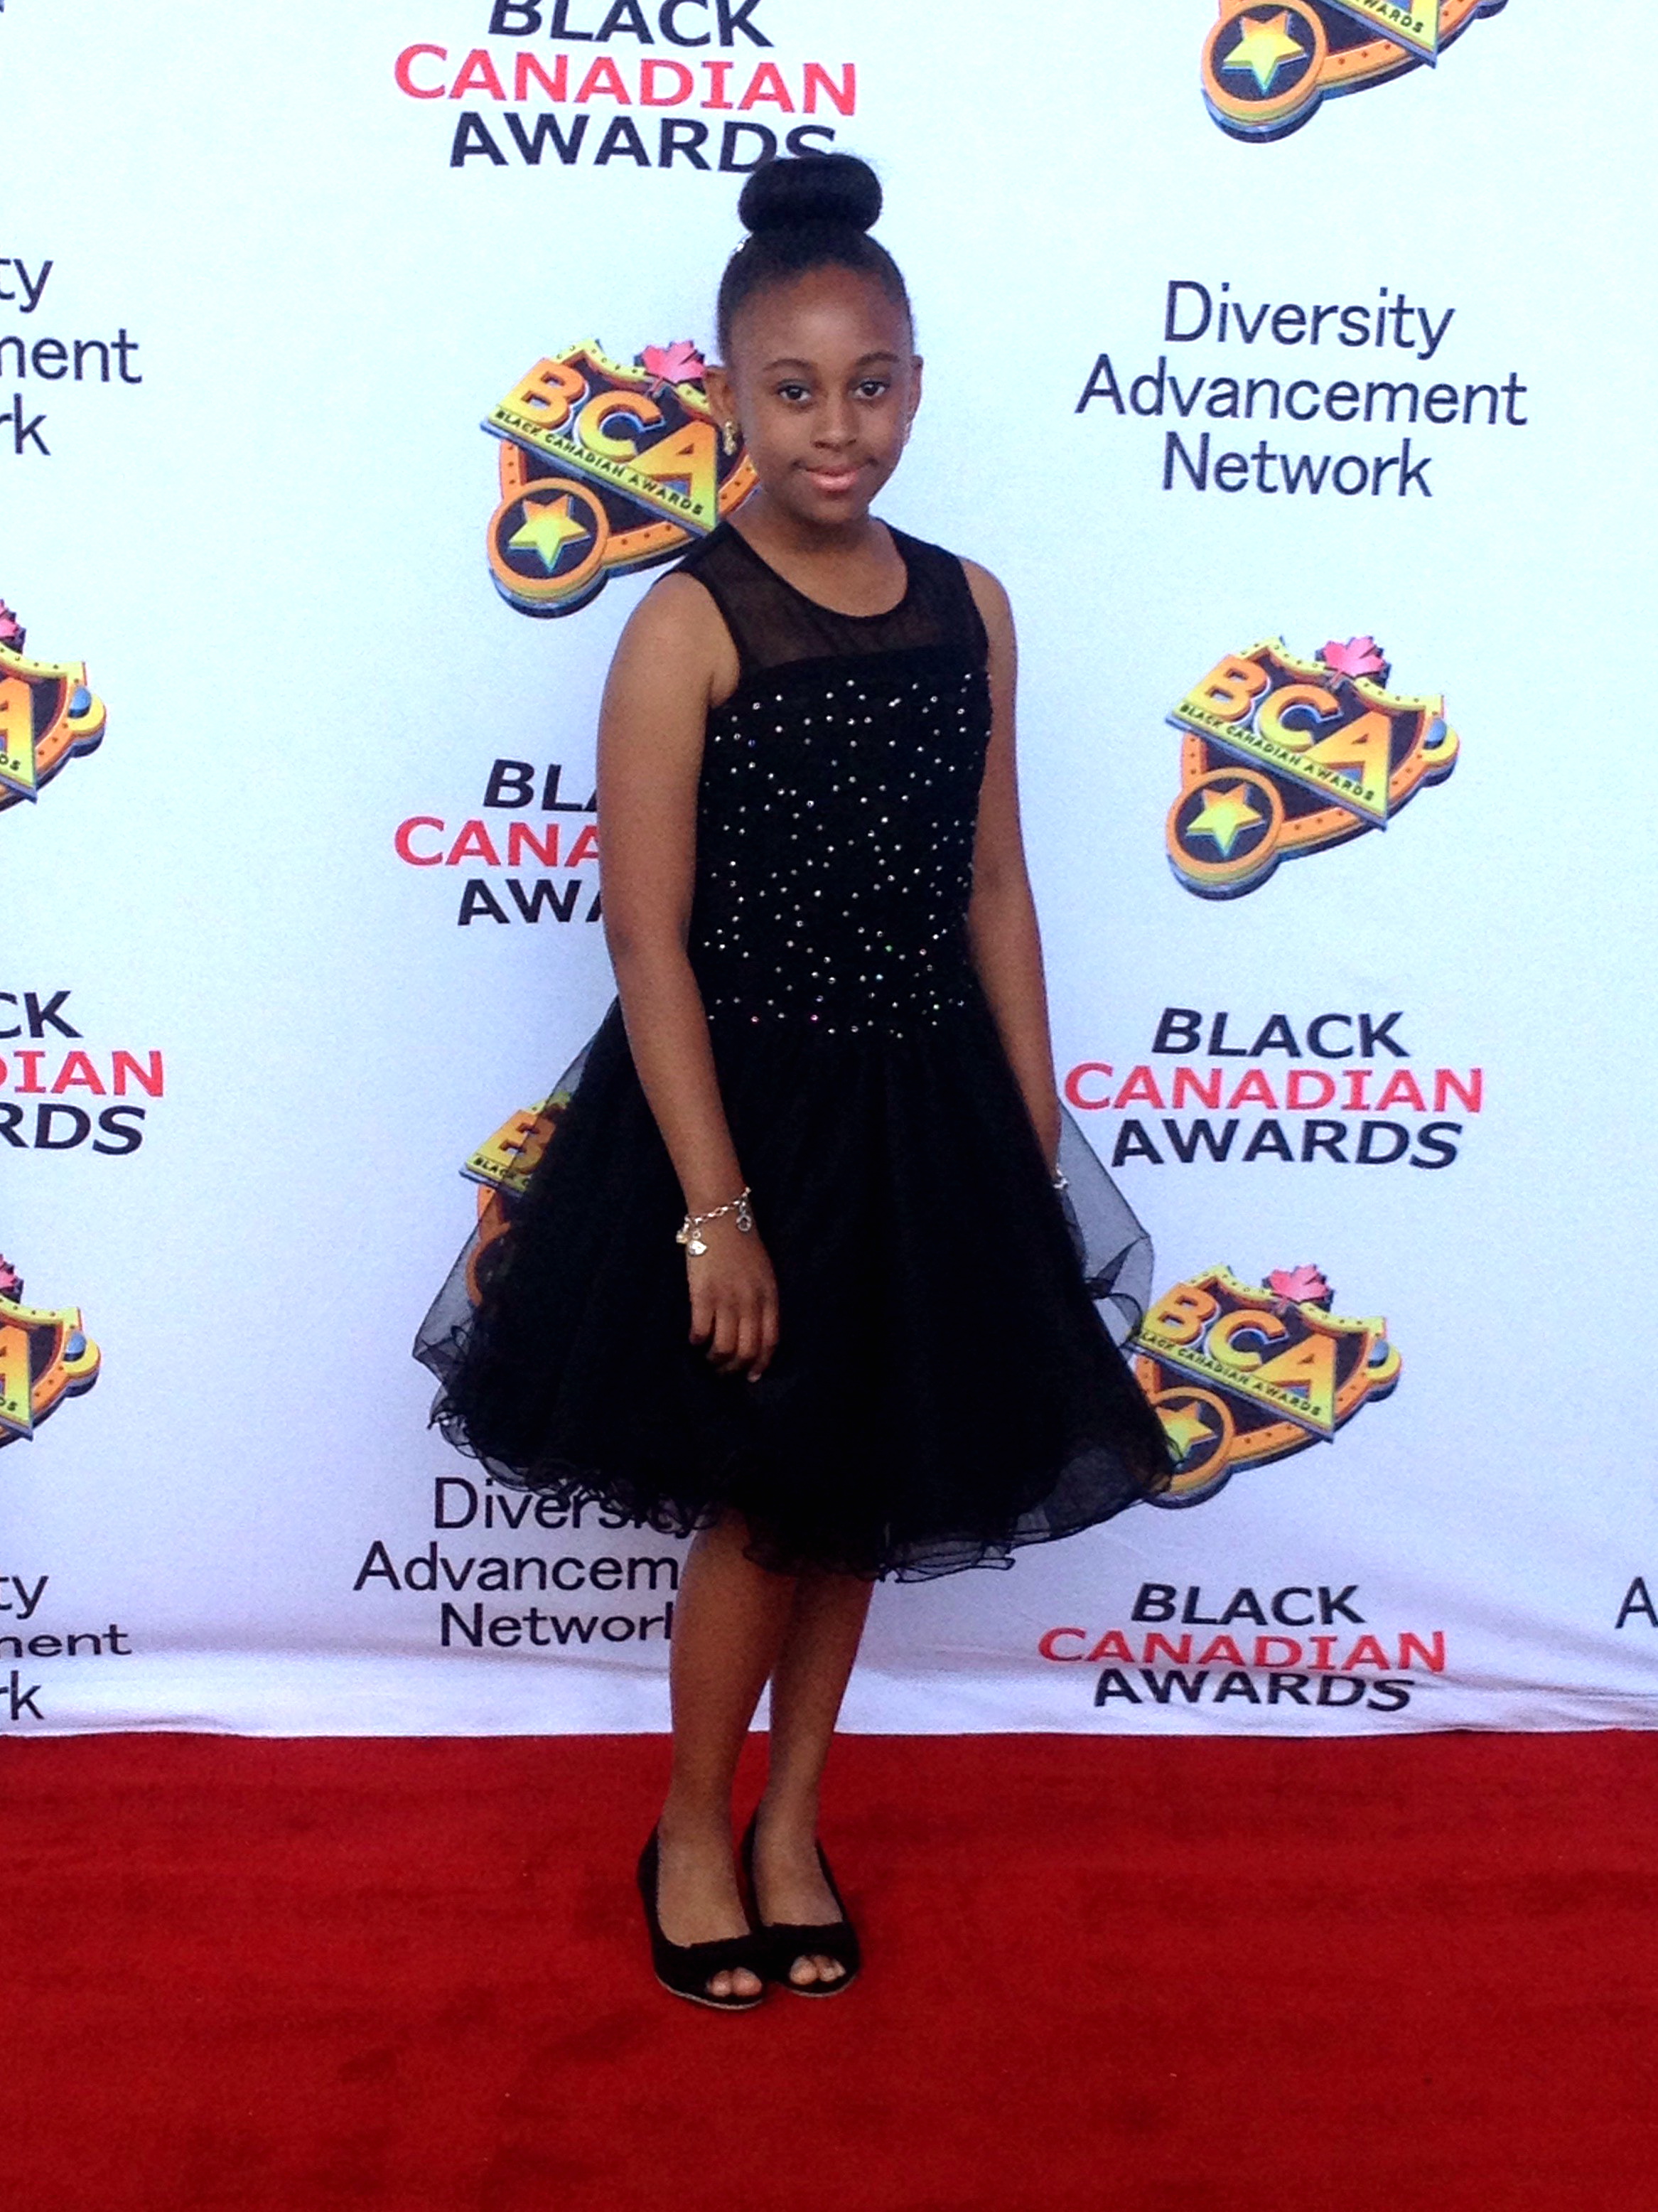 Allison at the 2015 Black Canadian Awards in Toronto, Canada